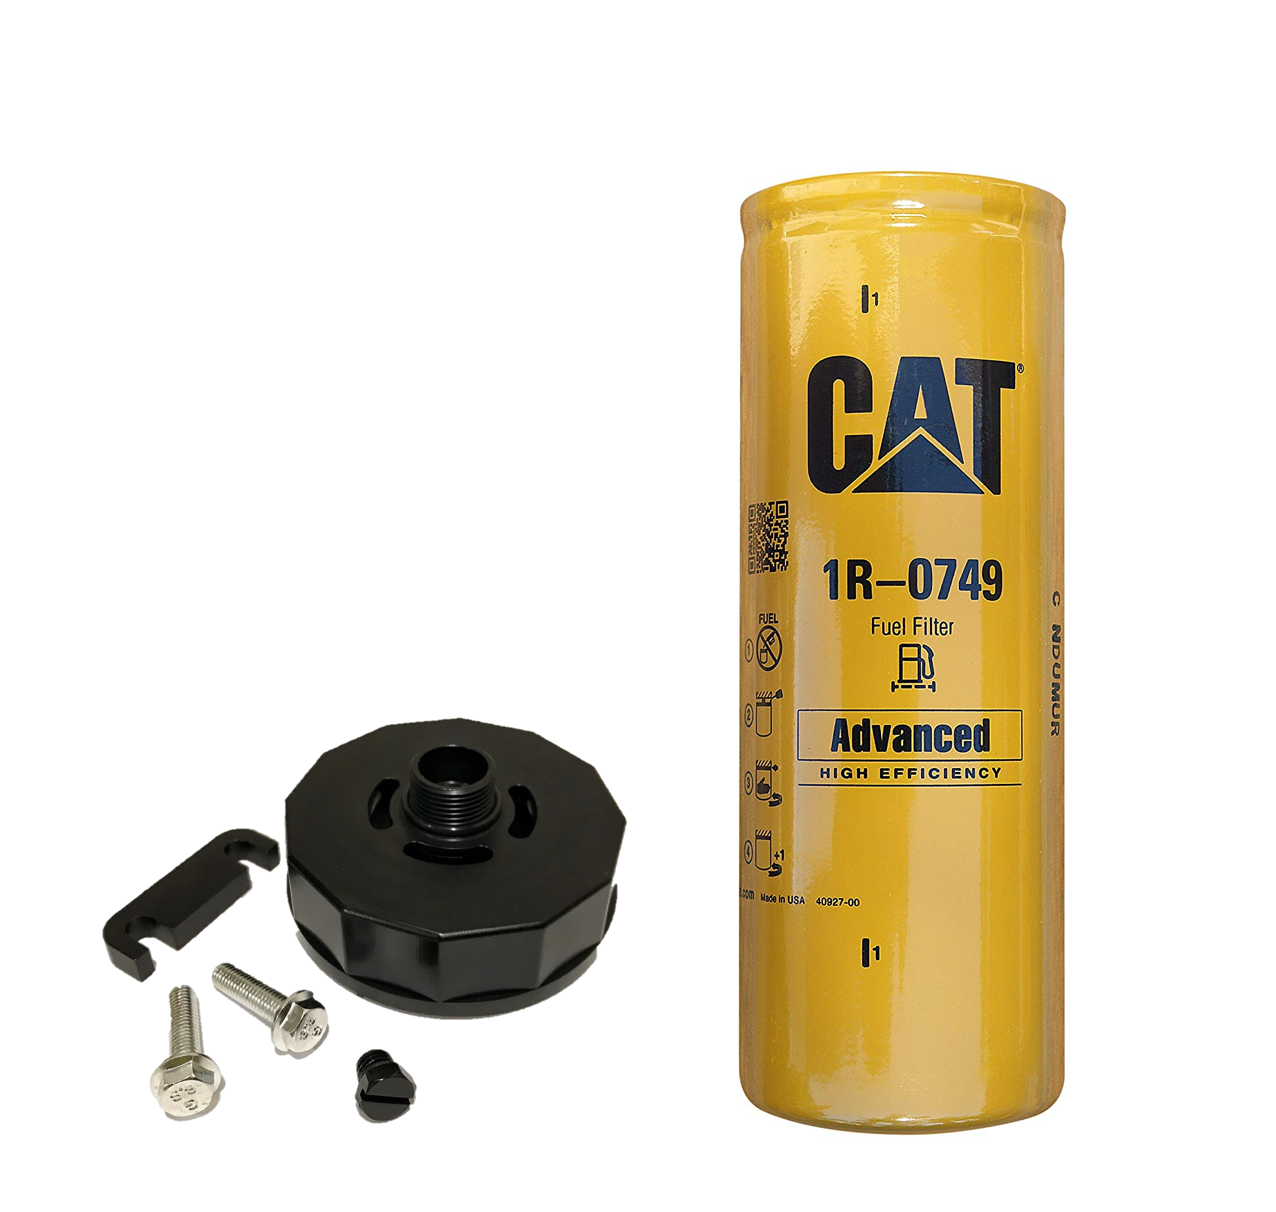 Cat Fuel Filter For Duramax - Cat Meme Stock Pictures and Photos